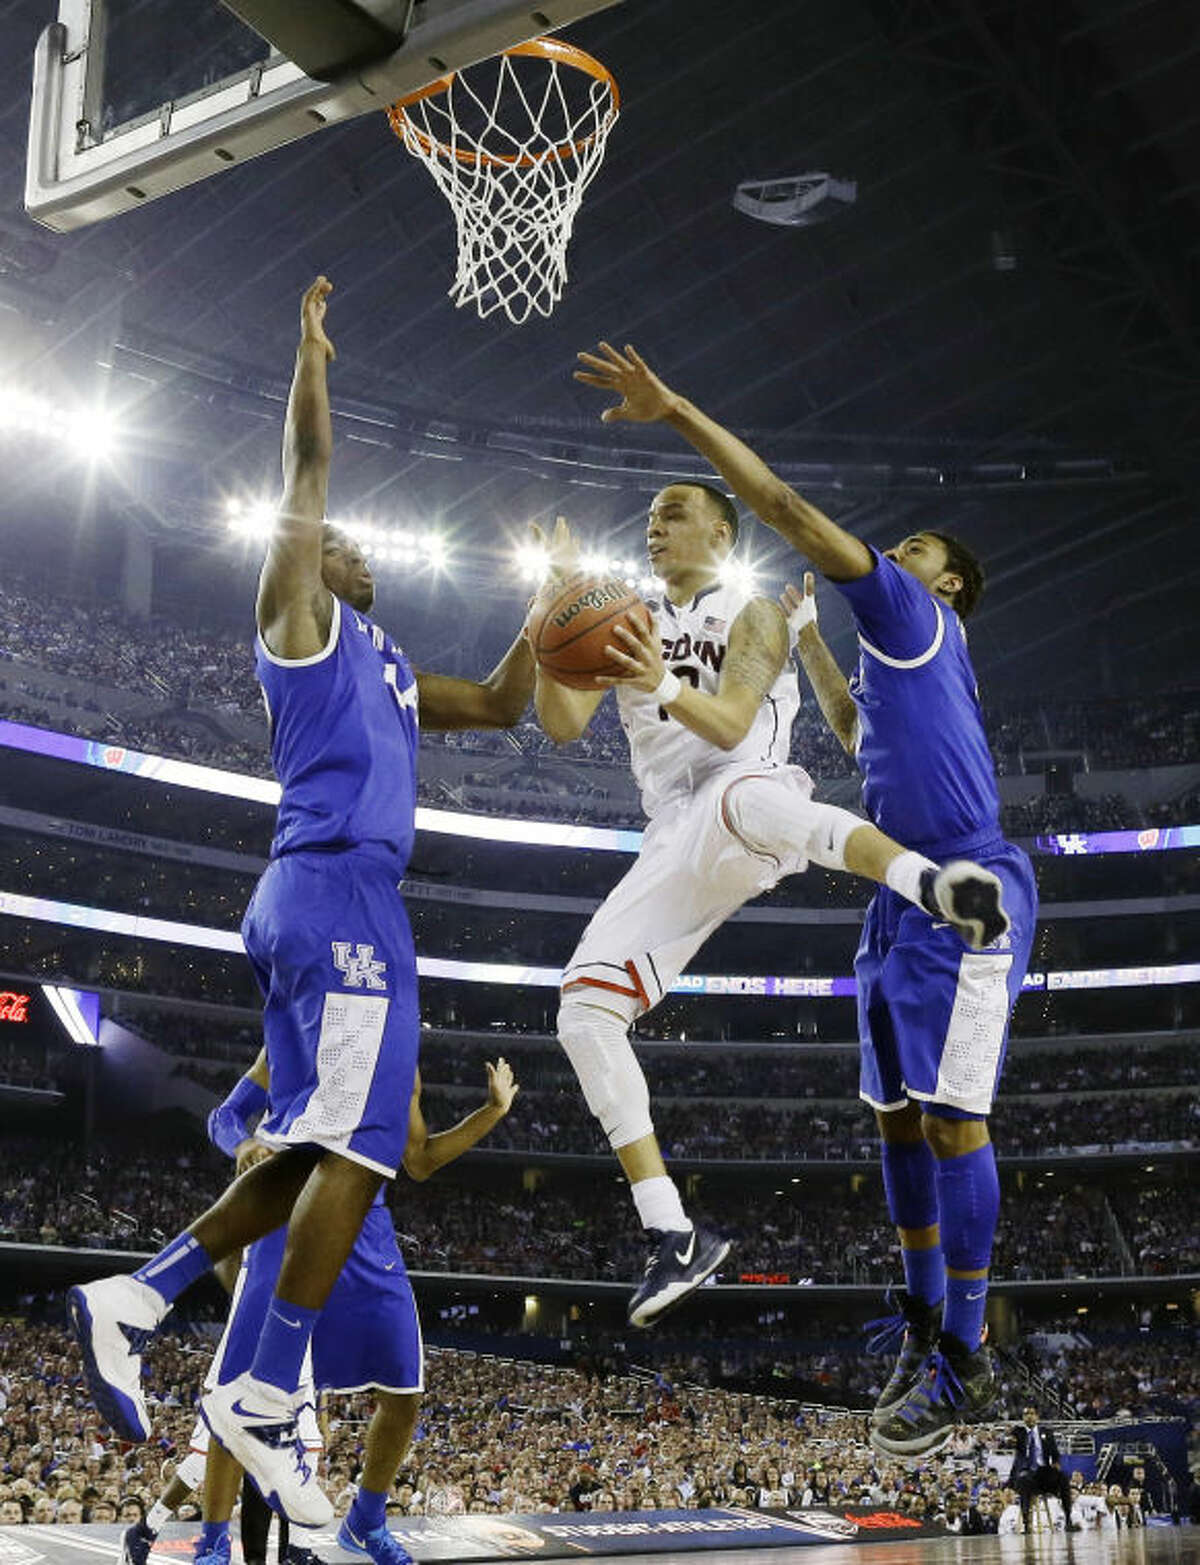 Connecticut guard Shabazz Napier shoots between Kentucky center Dakari Johnson (44) and guard James Young (1), right, during the first half of the NCAA Final Four tournament college basketball championship game Monday, April 7, 2014, in Arlington, Texas. (AP Photo/David J. Phillip)